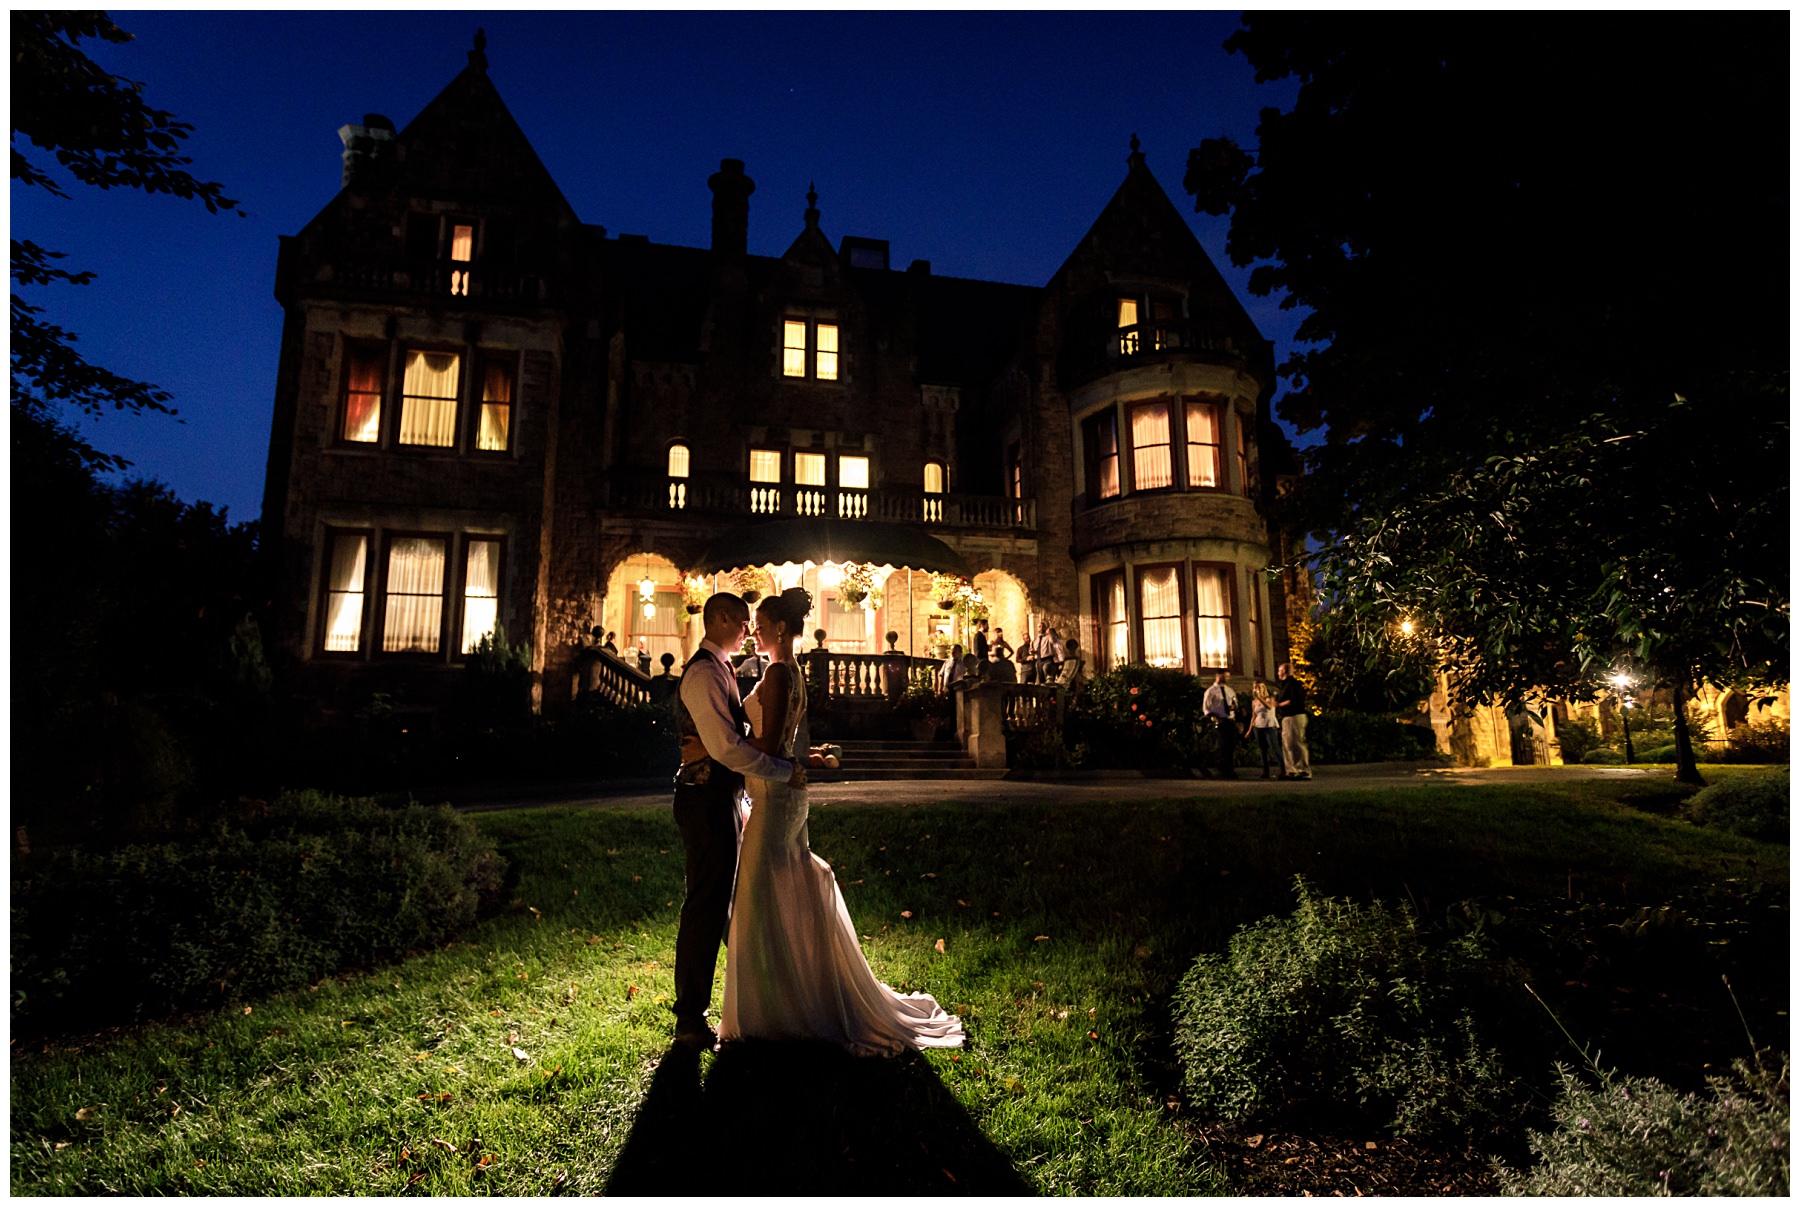 mysterious night shot at historic wedding venue in reading pa